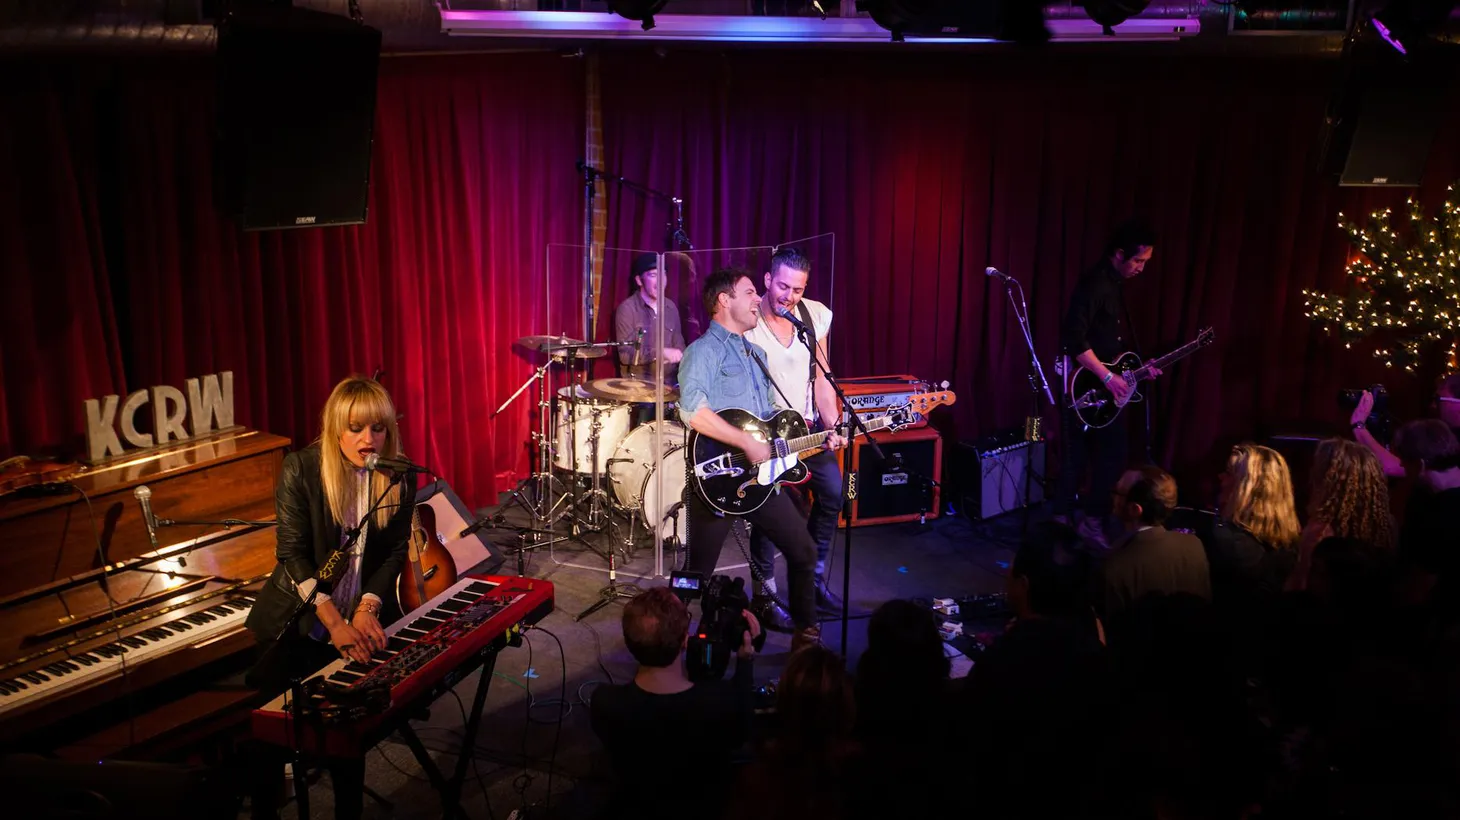 The Airborne Toxic Event have been road warriors over the last few years and returned to LA to present some of their new songs in a live set at KCRW's Apogee Sessions.